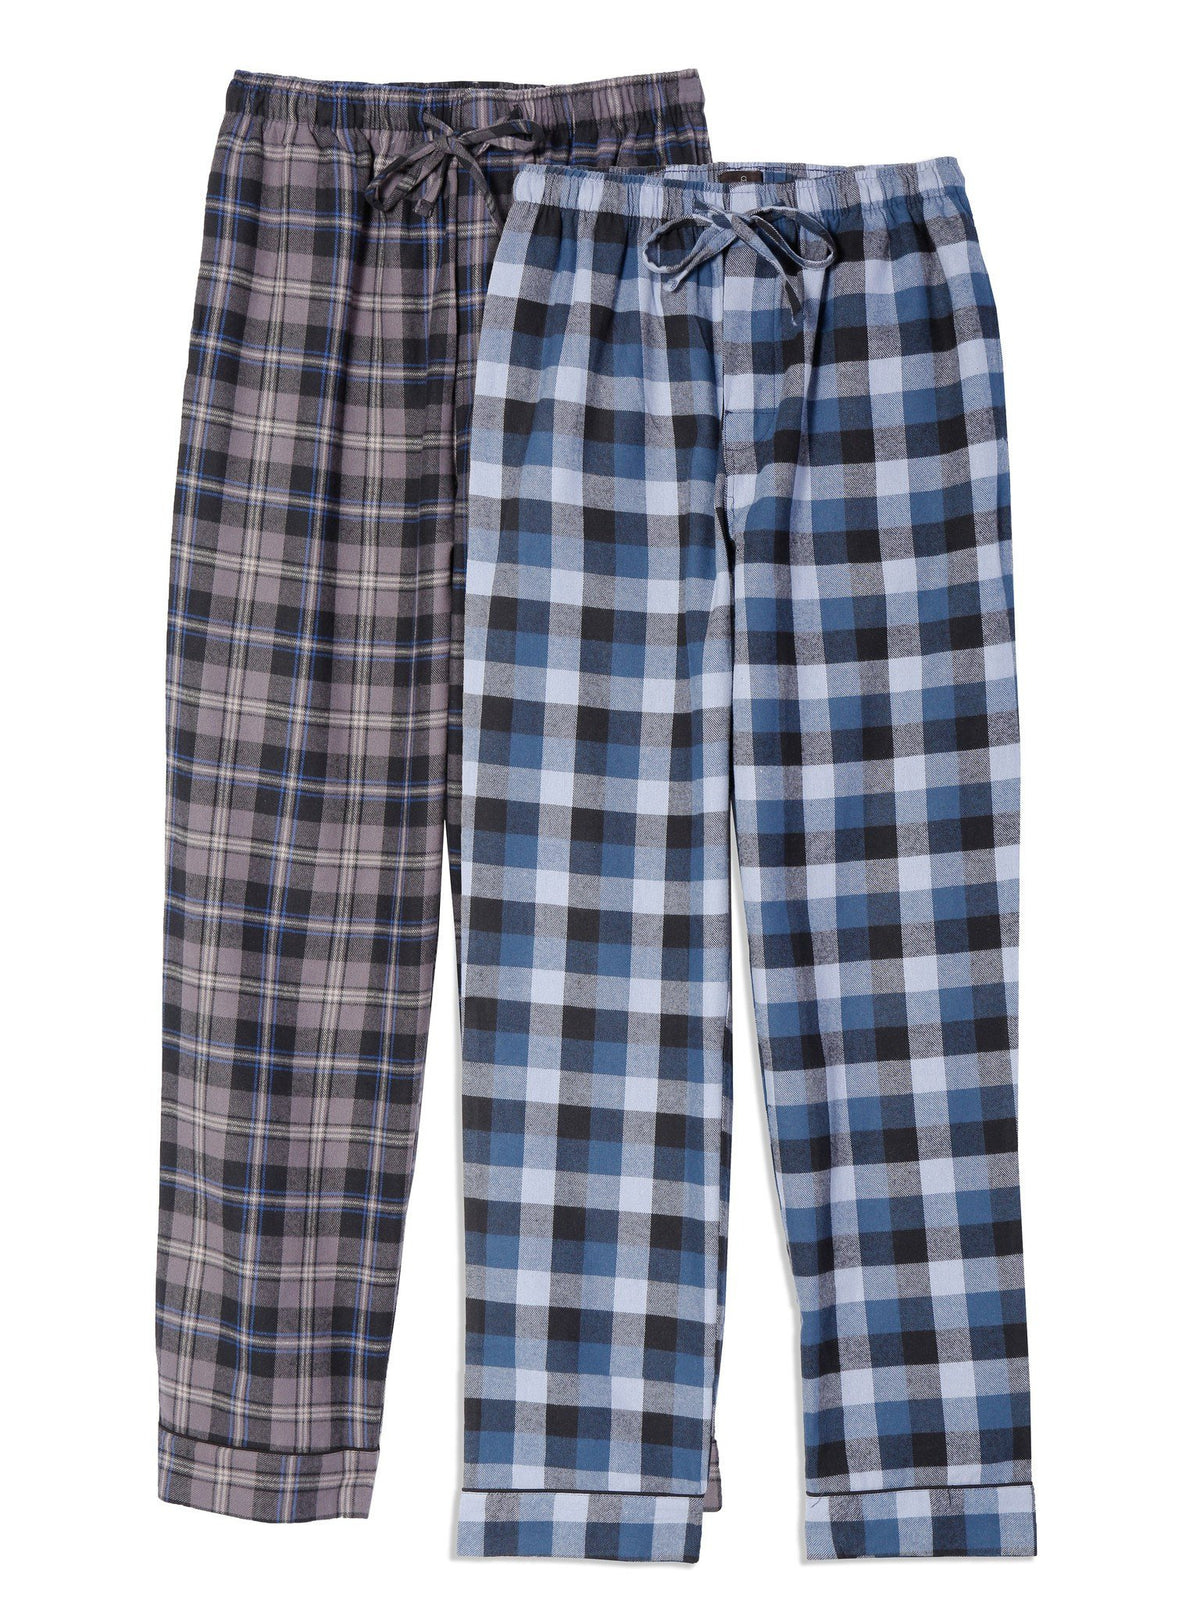 Mens 100% Cotton Flannel Lounge Pants (Relaxed Fit) 2-Pack - 2-Pack (Denim and Brown Tone)